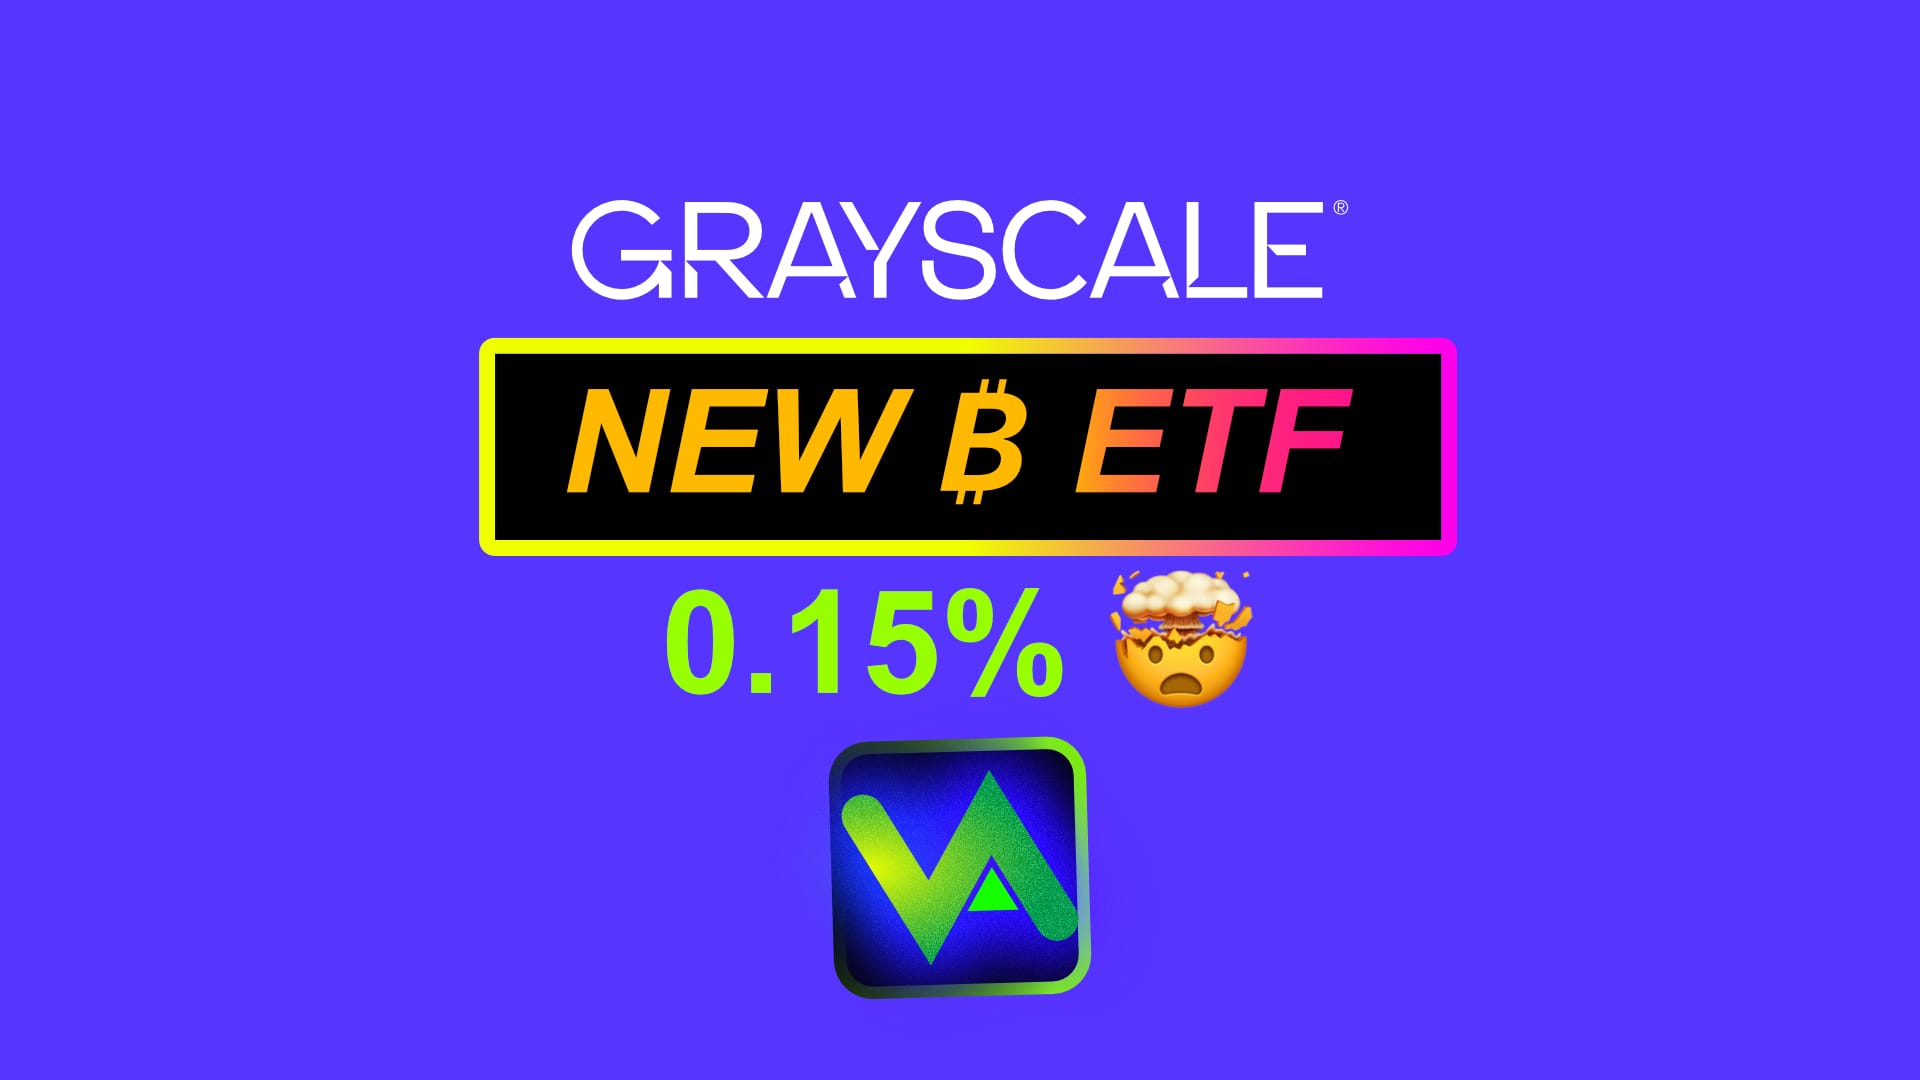 Grayscale Unveils New Bitcoin ETF with Industry Low 0.15% Fee